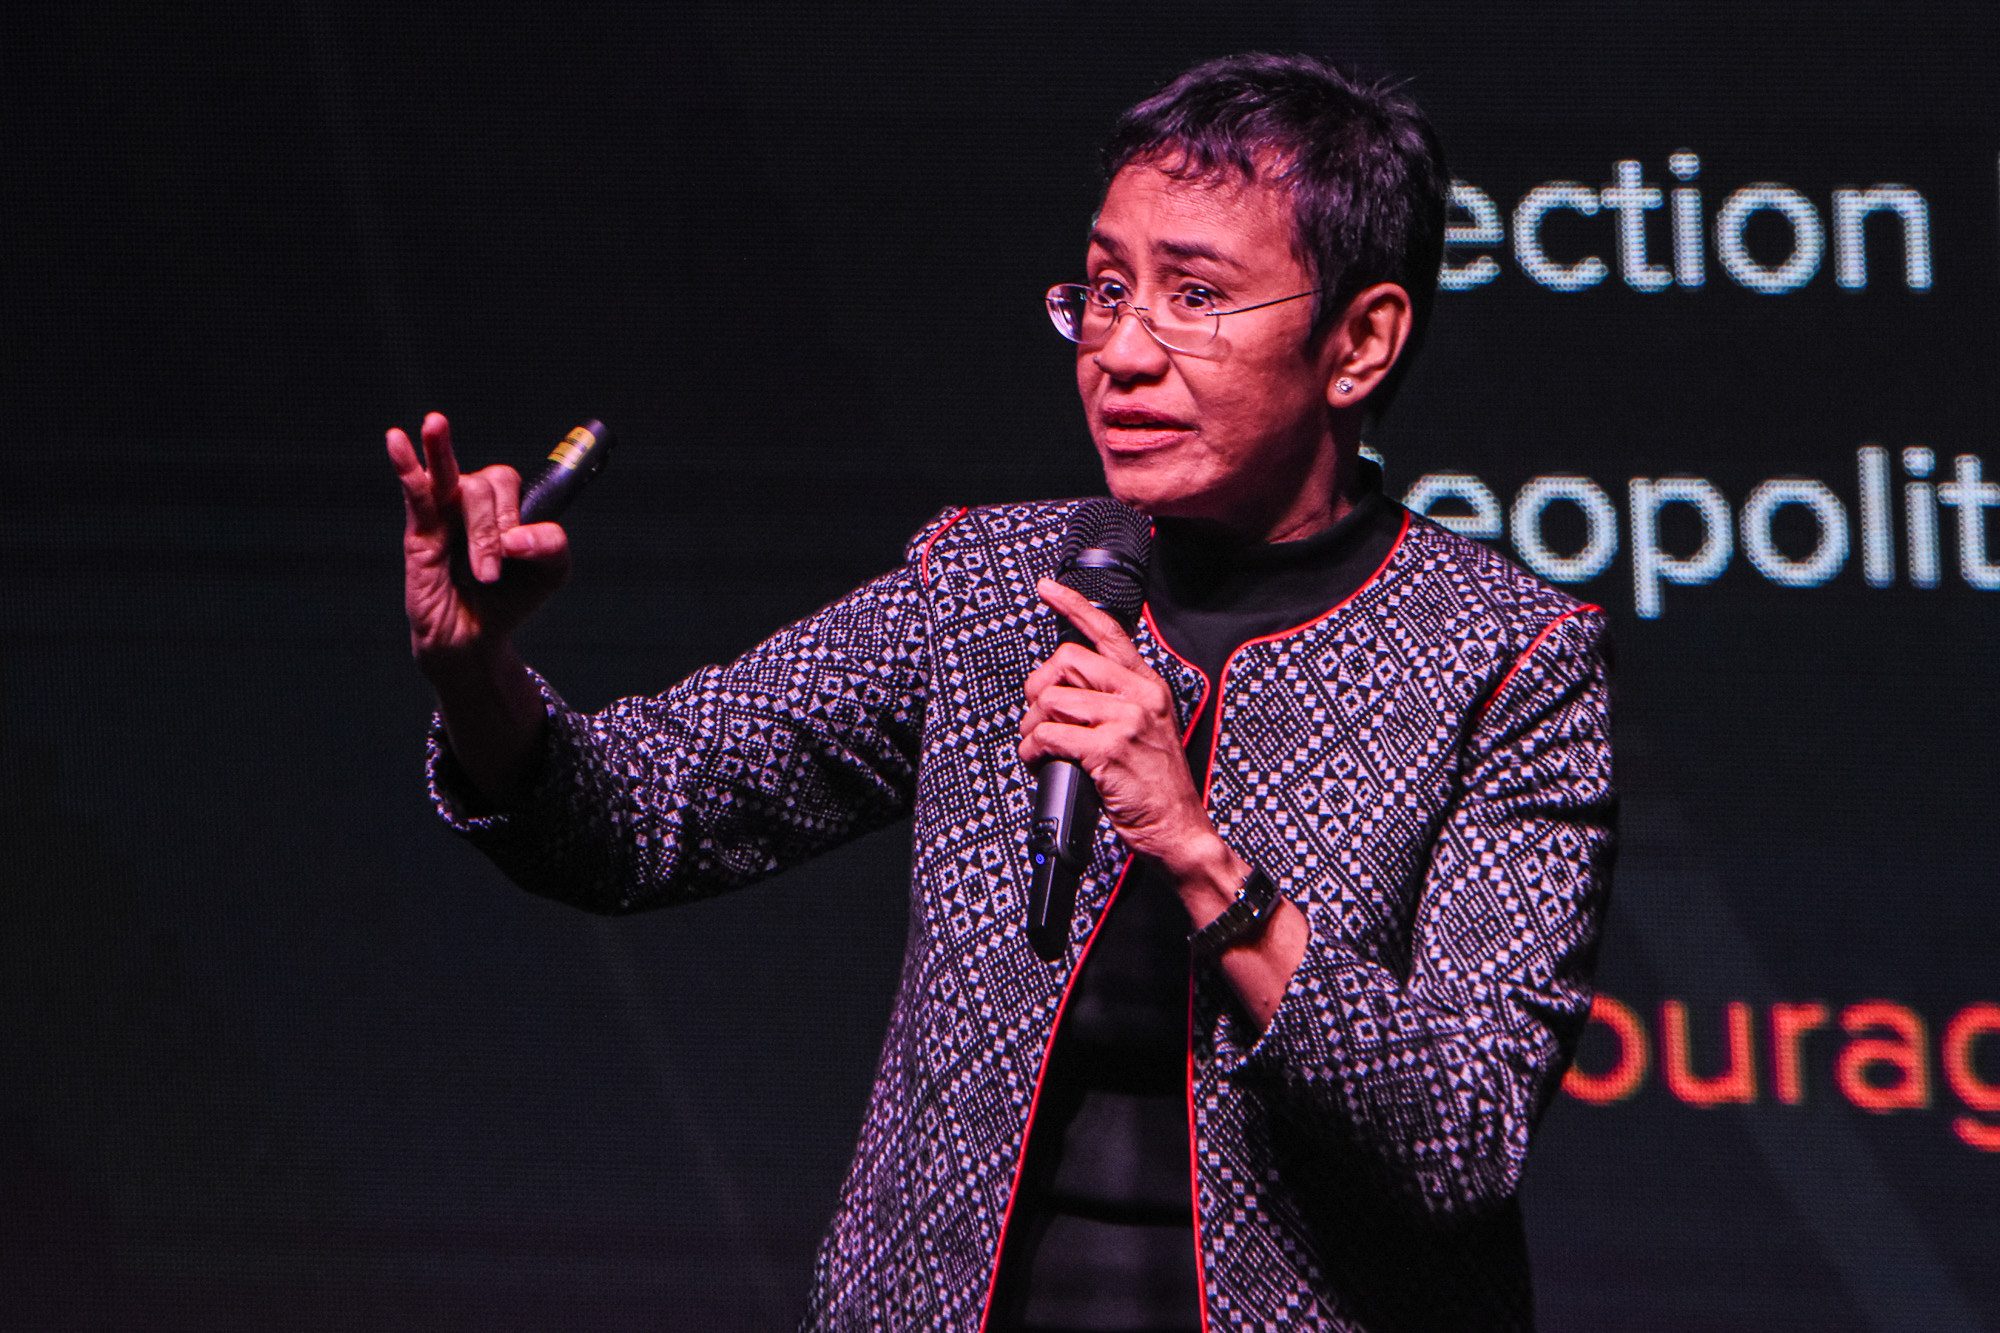 Global media groups urge SC to overturn Maria Ressa’s cyber libel conviction